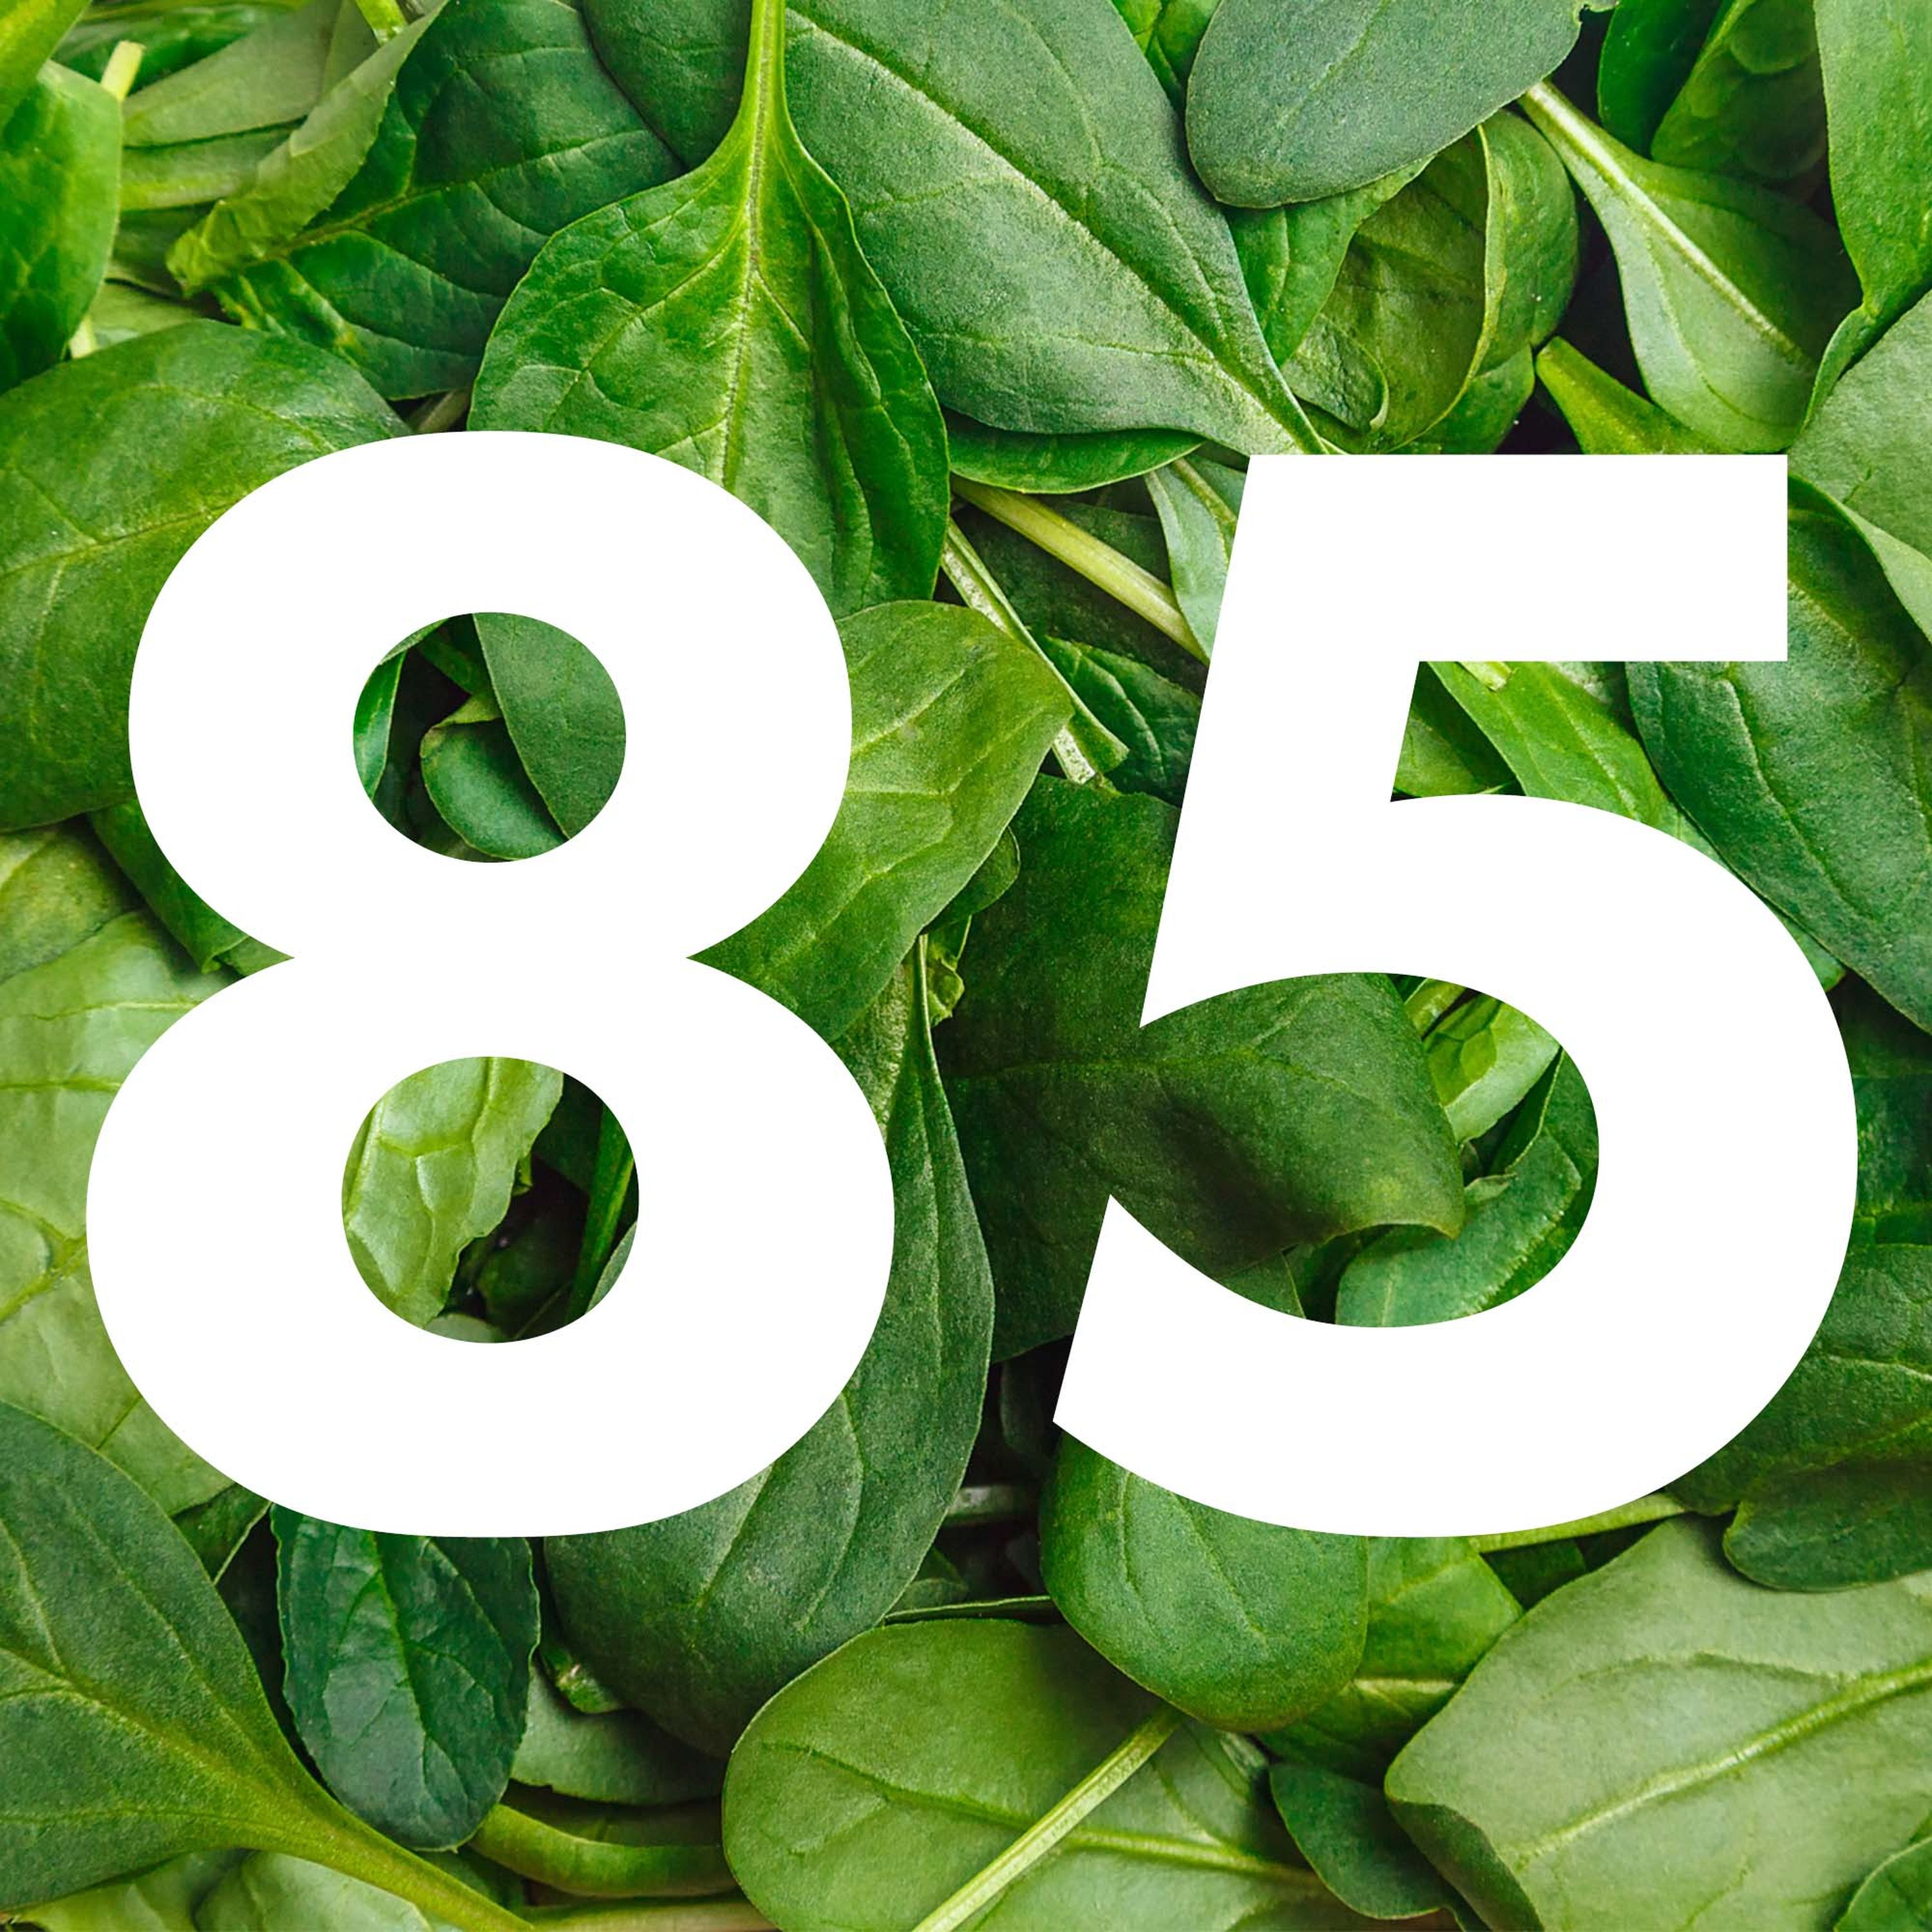 85 The Splendours of Spinach